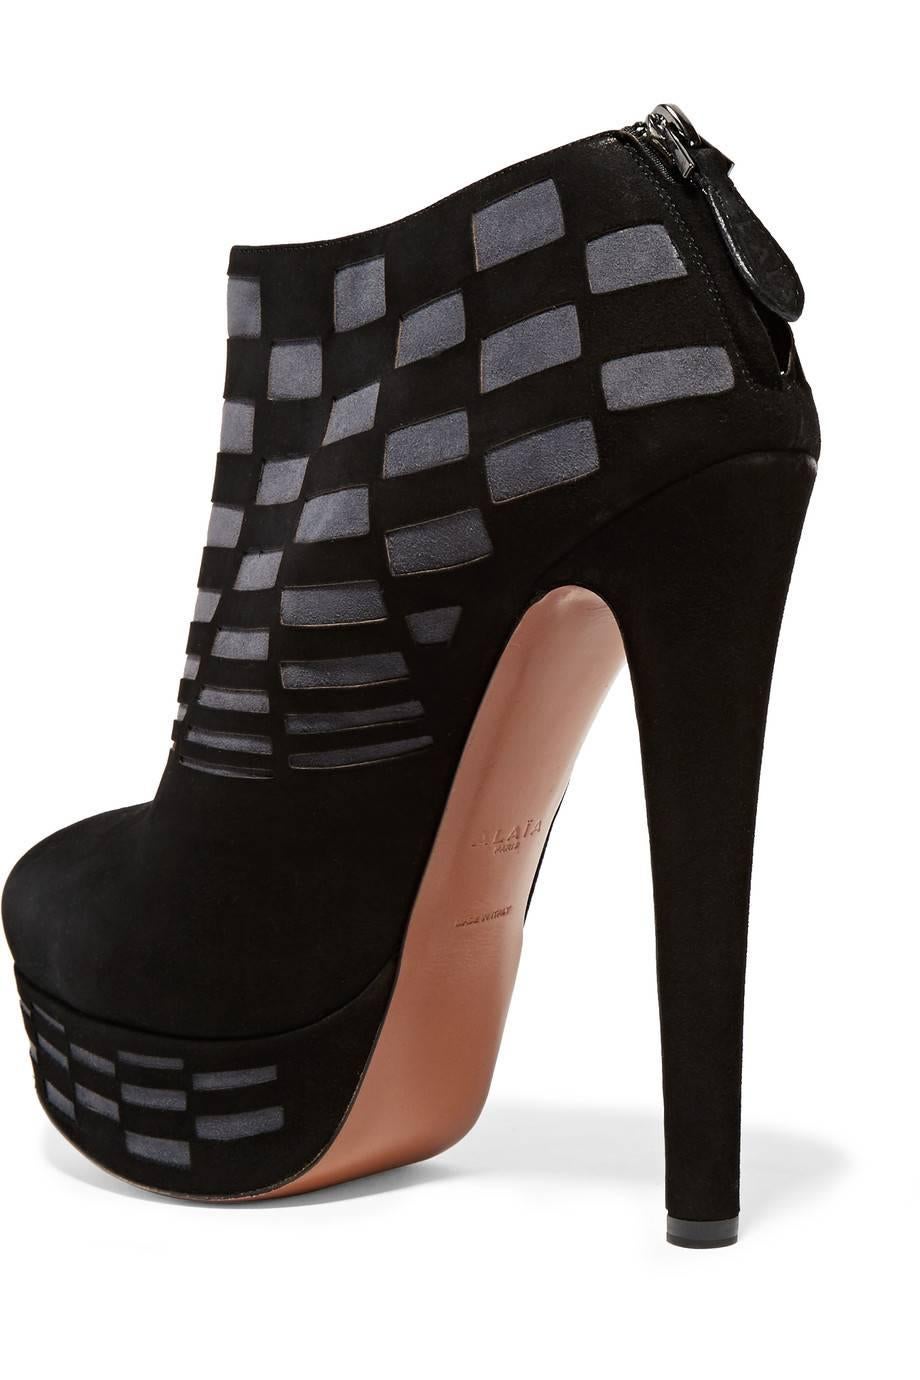 Women's Alaïa NEW & SOLD OUT Black Gray Suede Geometric Platform Ankle Booties in Box